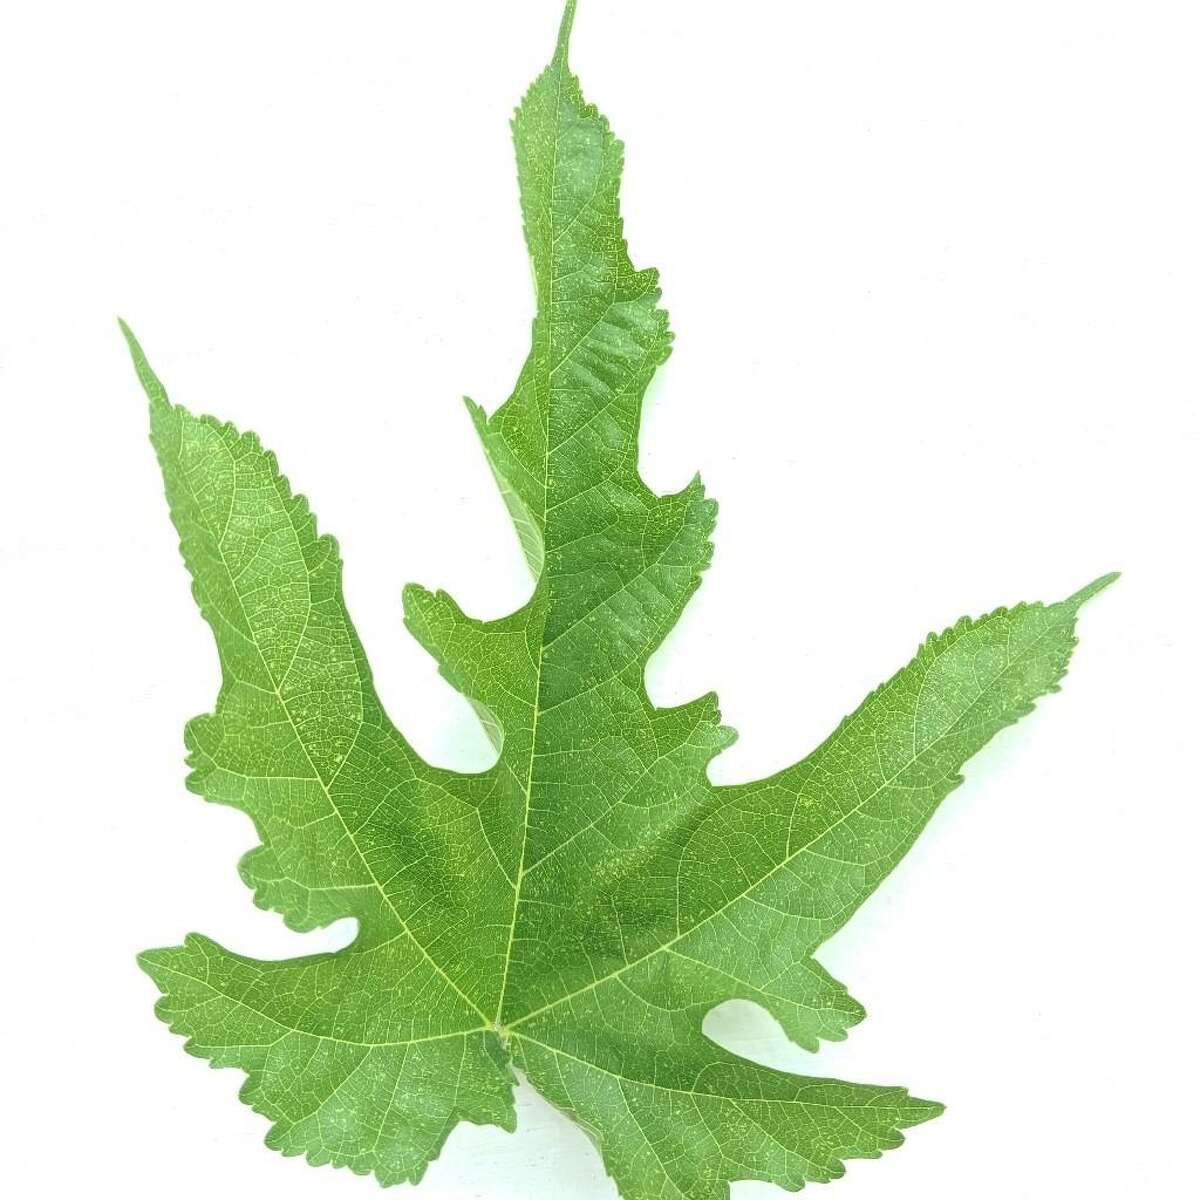 A photo of the leaf that Houston Chronicle writer Maggie Gordon submitted to a slew of gardening apps to determine which plant was growing in her garden. While the apps couldn't definitively determine its identity, it was later revealed to be a White Mulberry.